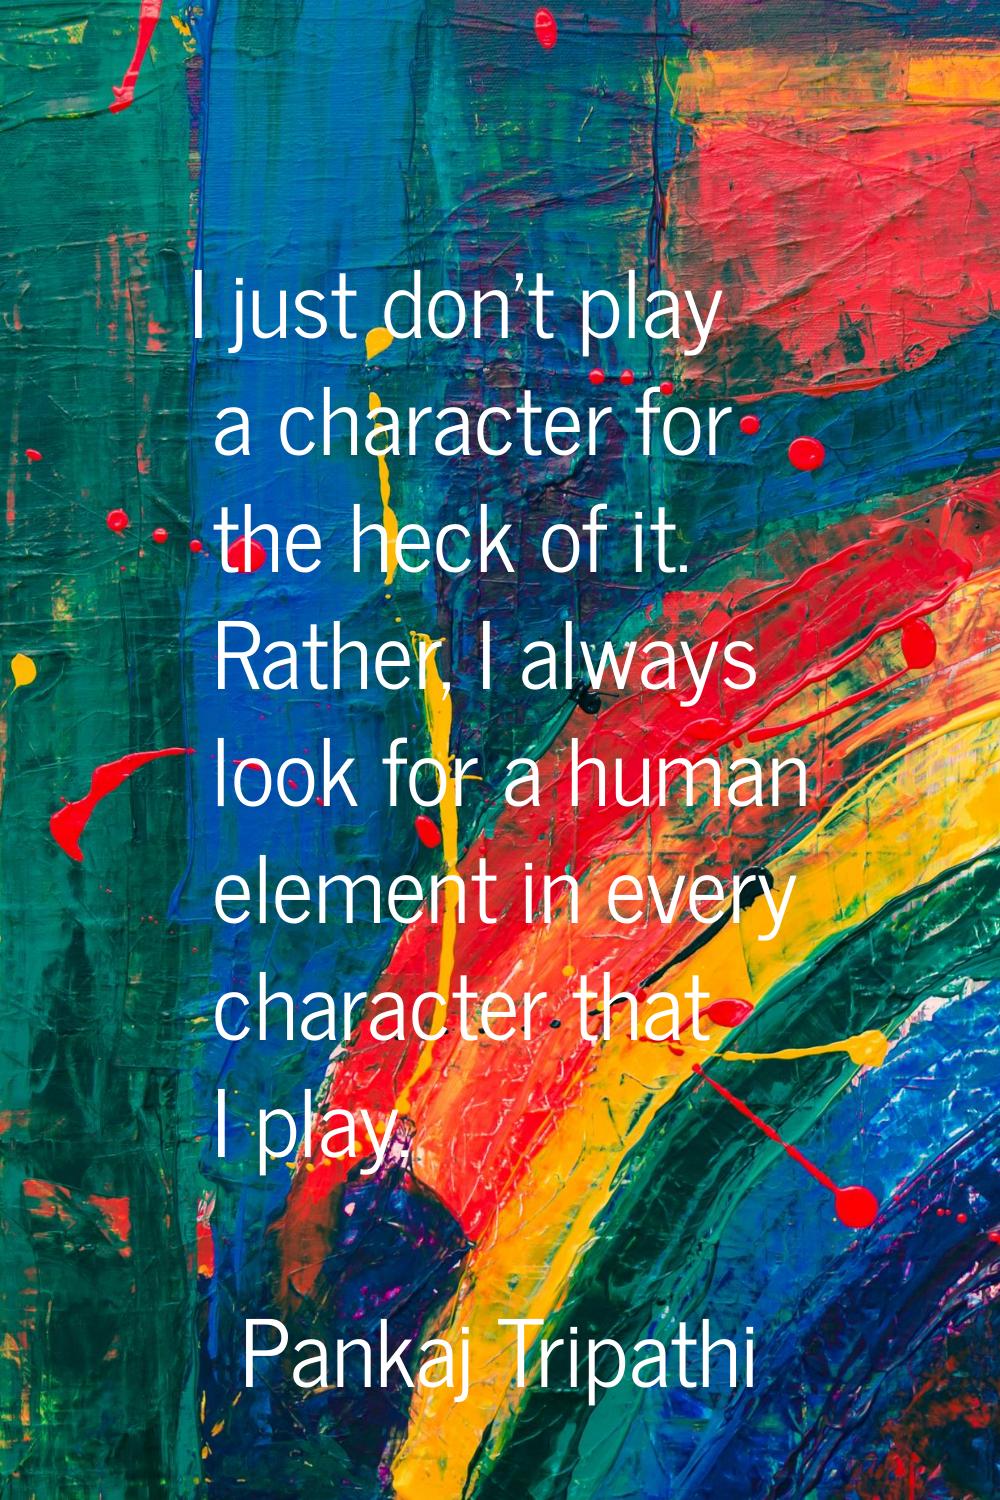 I just don't play a character for the heck of it. Rather, I always look for a human element in ever